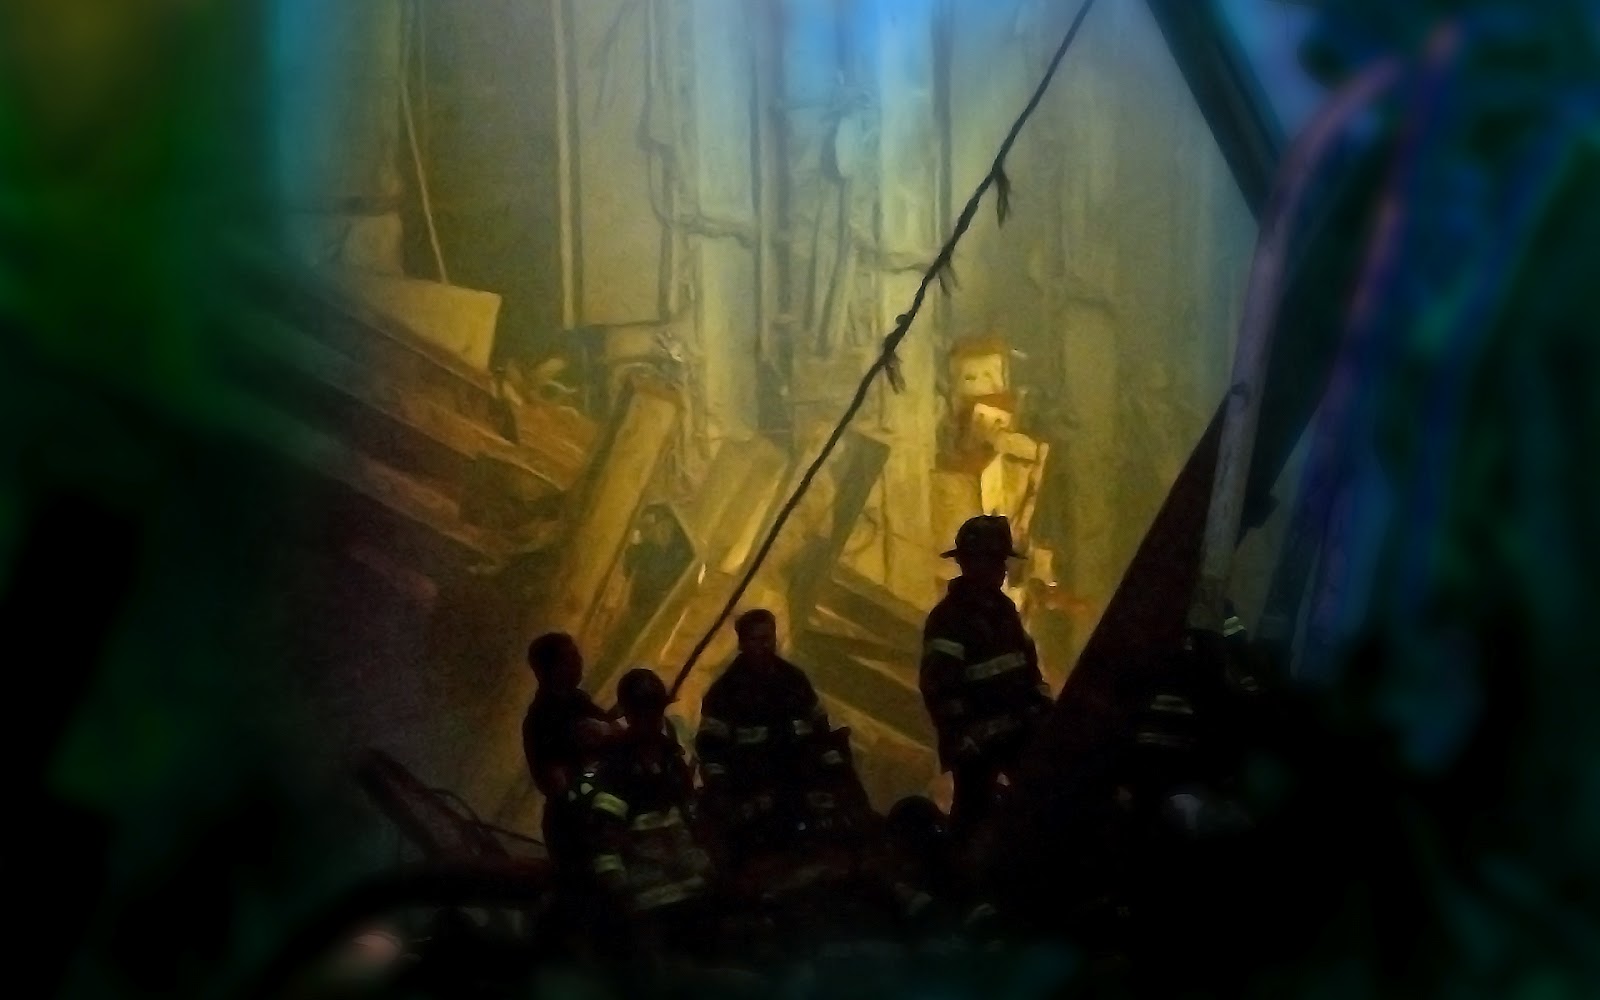 Wallpaper Of The Day Firefighters